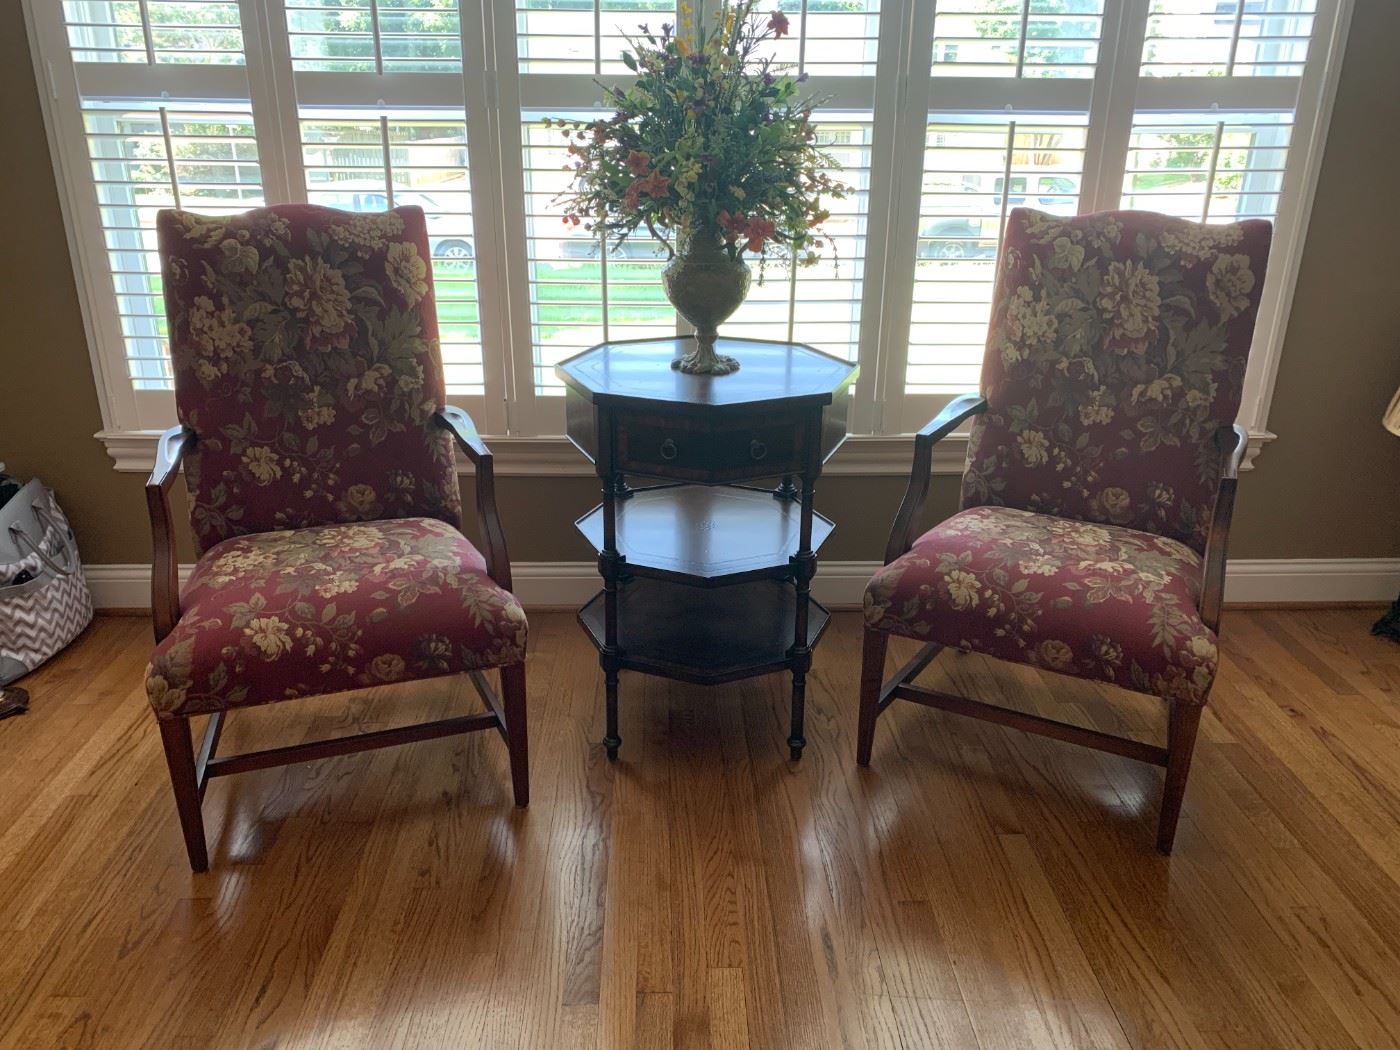 #1	Ethan Allen Wingback Chair - Burgundy Floral	 $100.00 
#2	Ethan Allen Wingback Chair - burgundy Floral	 $100.00 
#3	Maitland-Smith Octagonal Table w/2 shelves & Drawer - 24x33	 $275.00 
